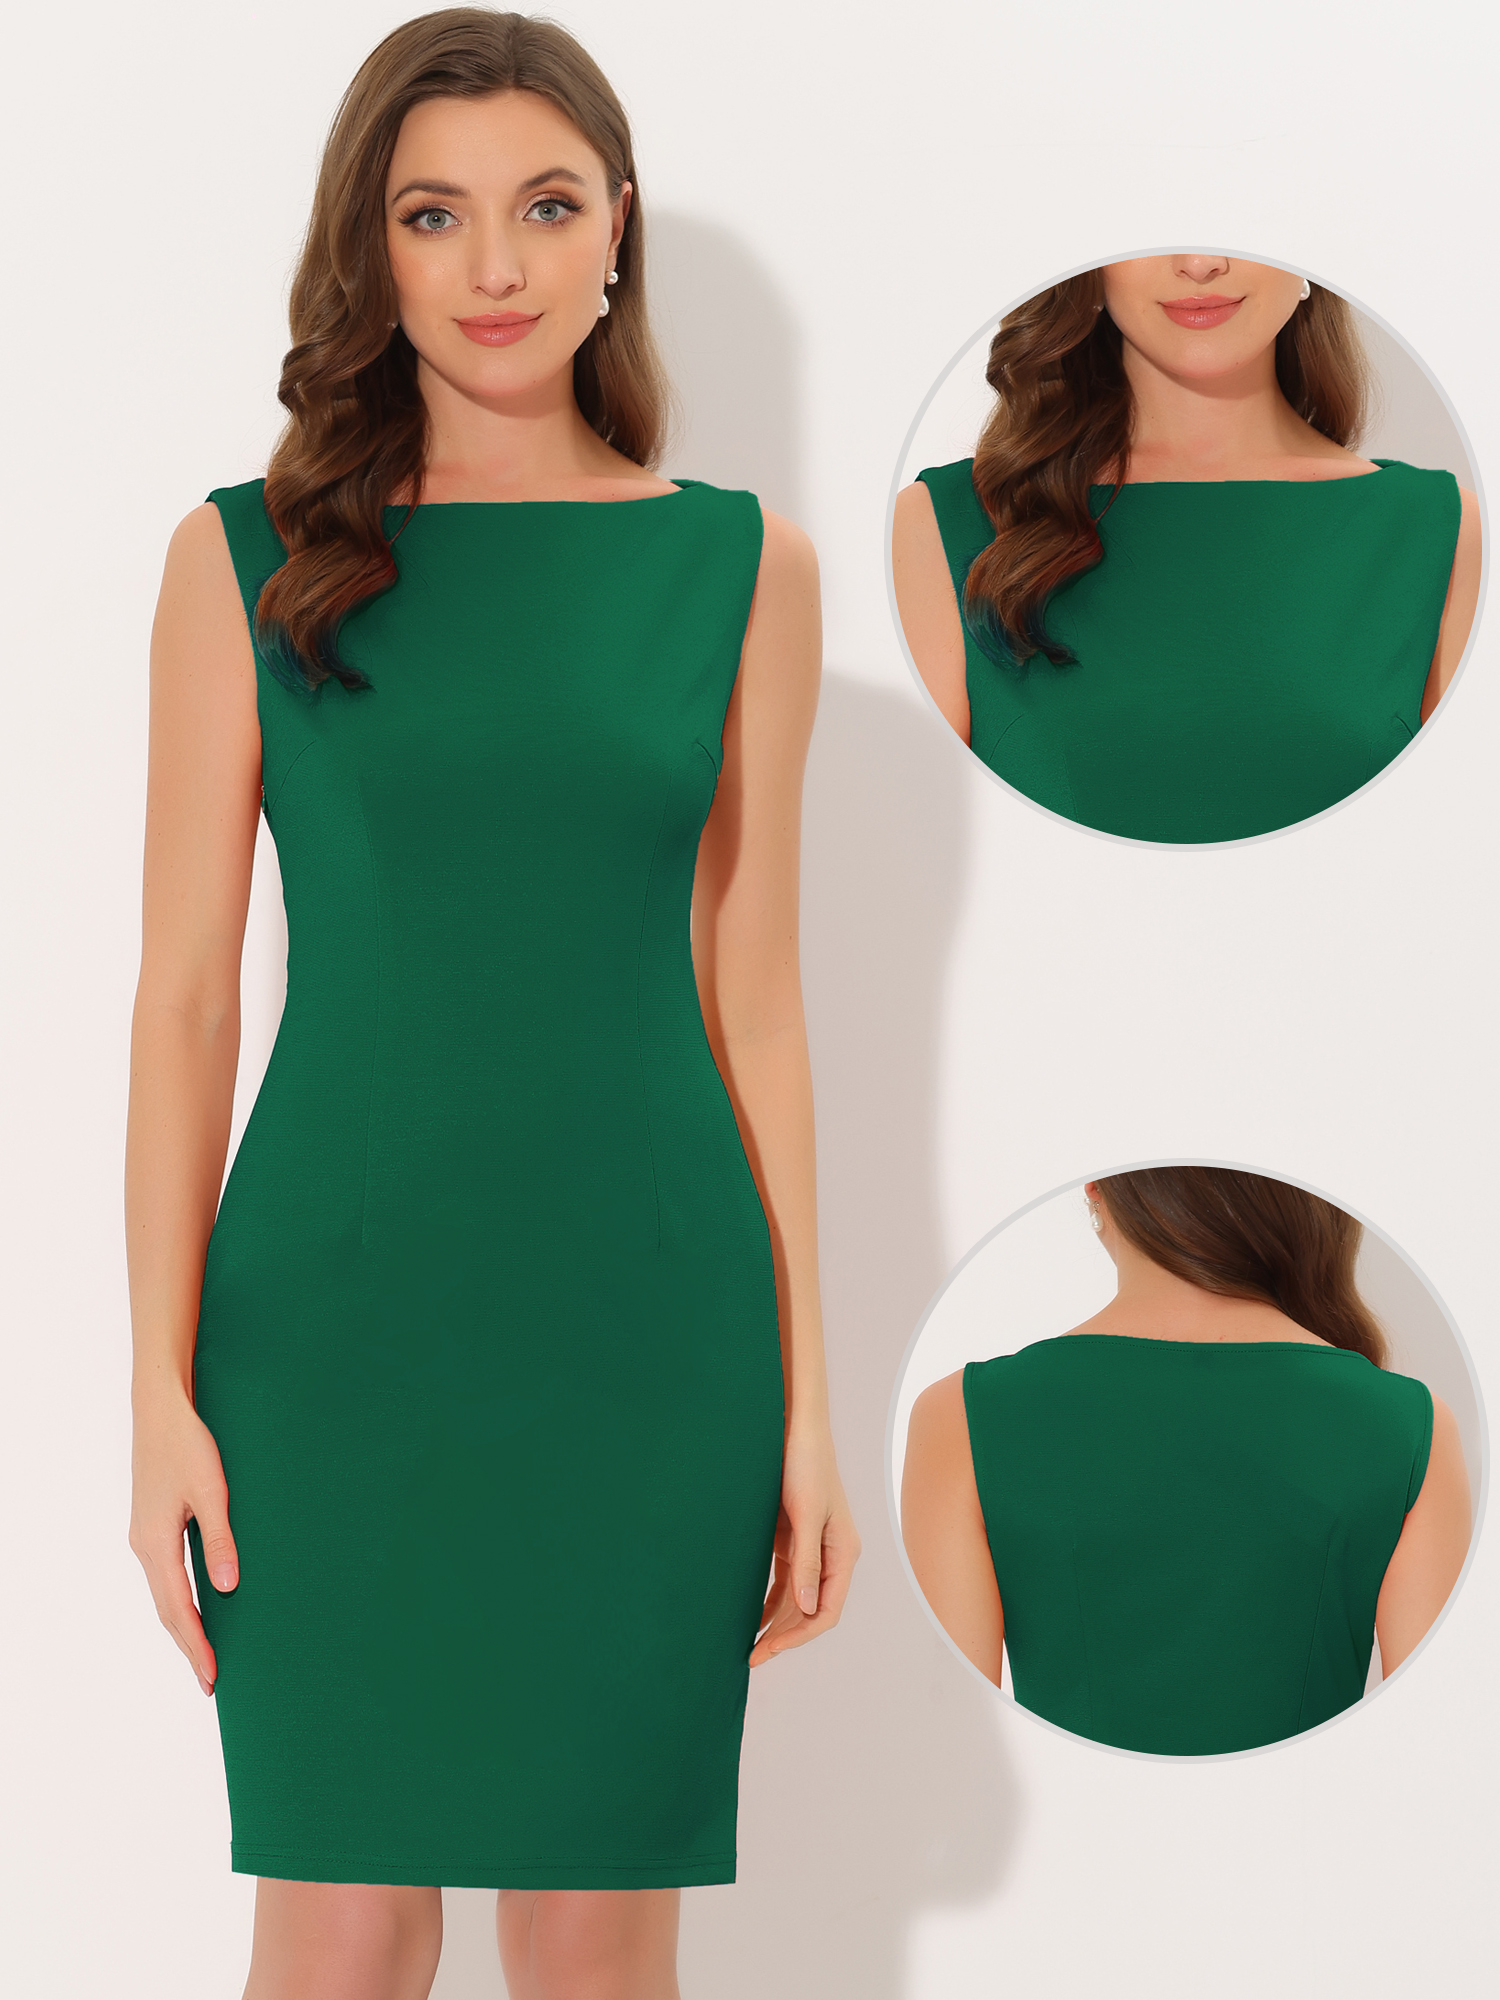 Unique Bargains Sleeveless Sheath Dress for Women's Boat Neck Casual Office Dresses